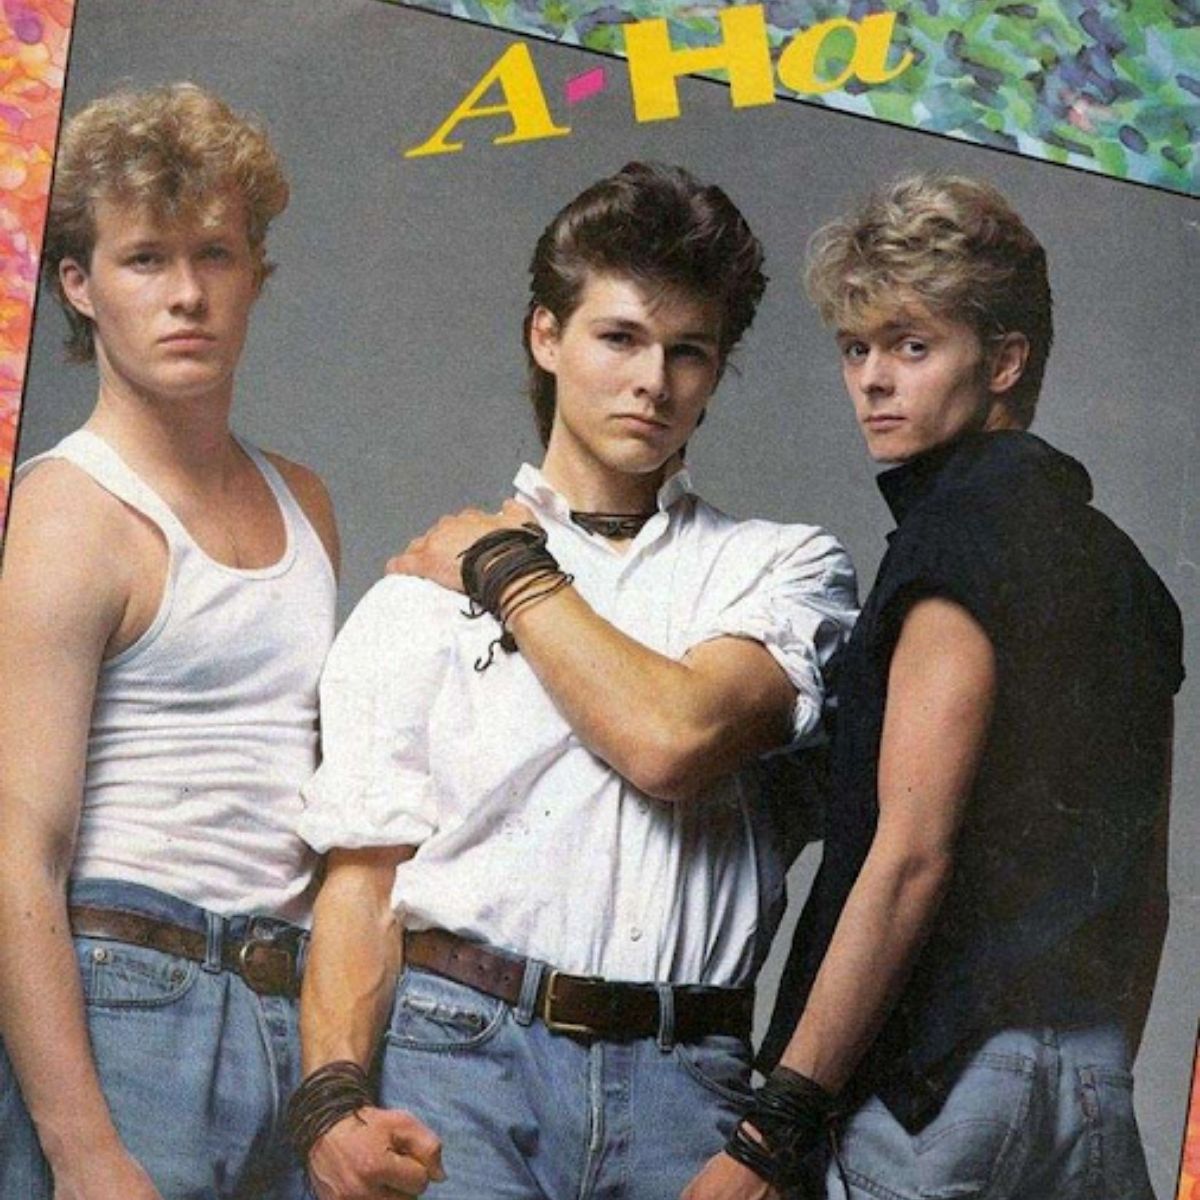 A-ha band members in their youth